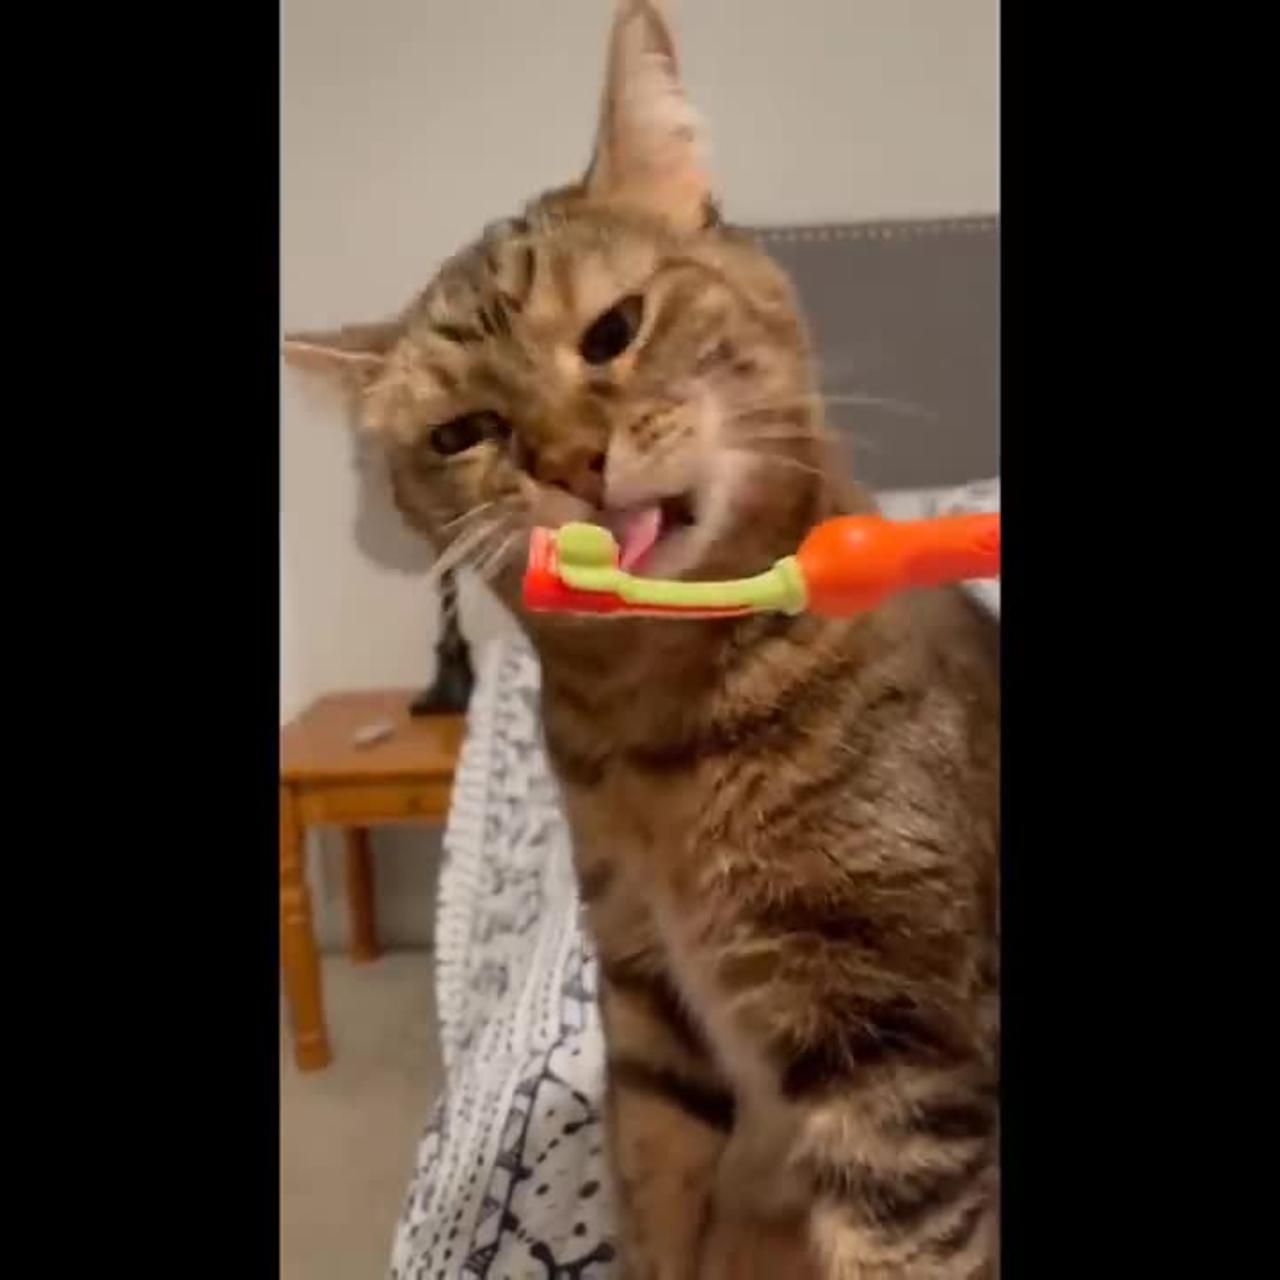 Funny Cats 😹 - Don't Try To Stop Laughing 🤣 - Funniest Cats Ever